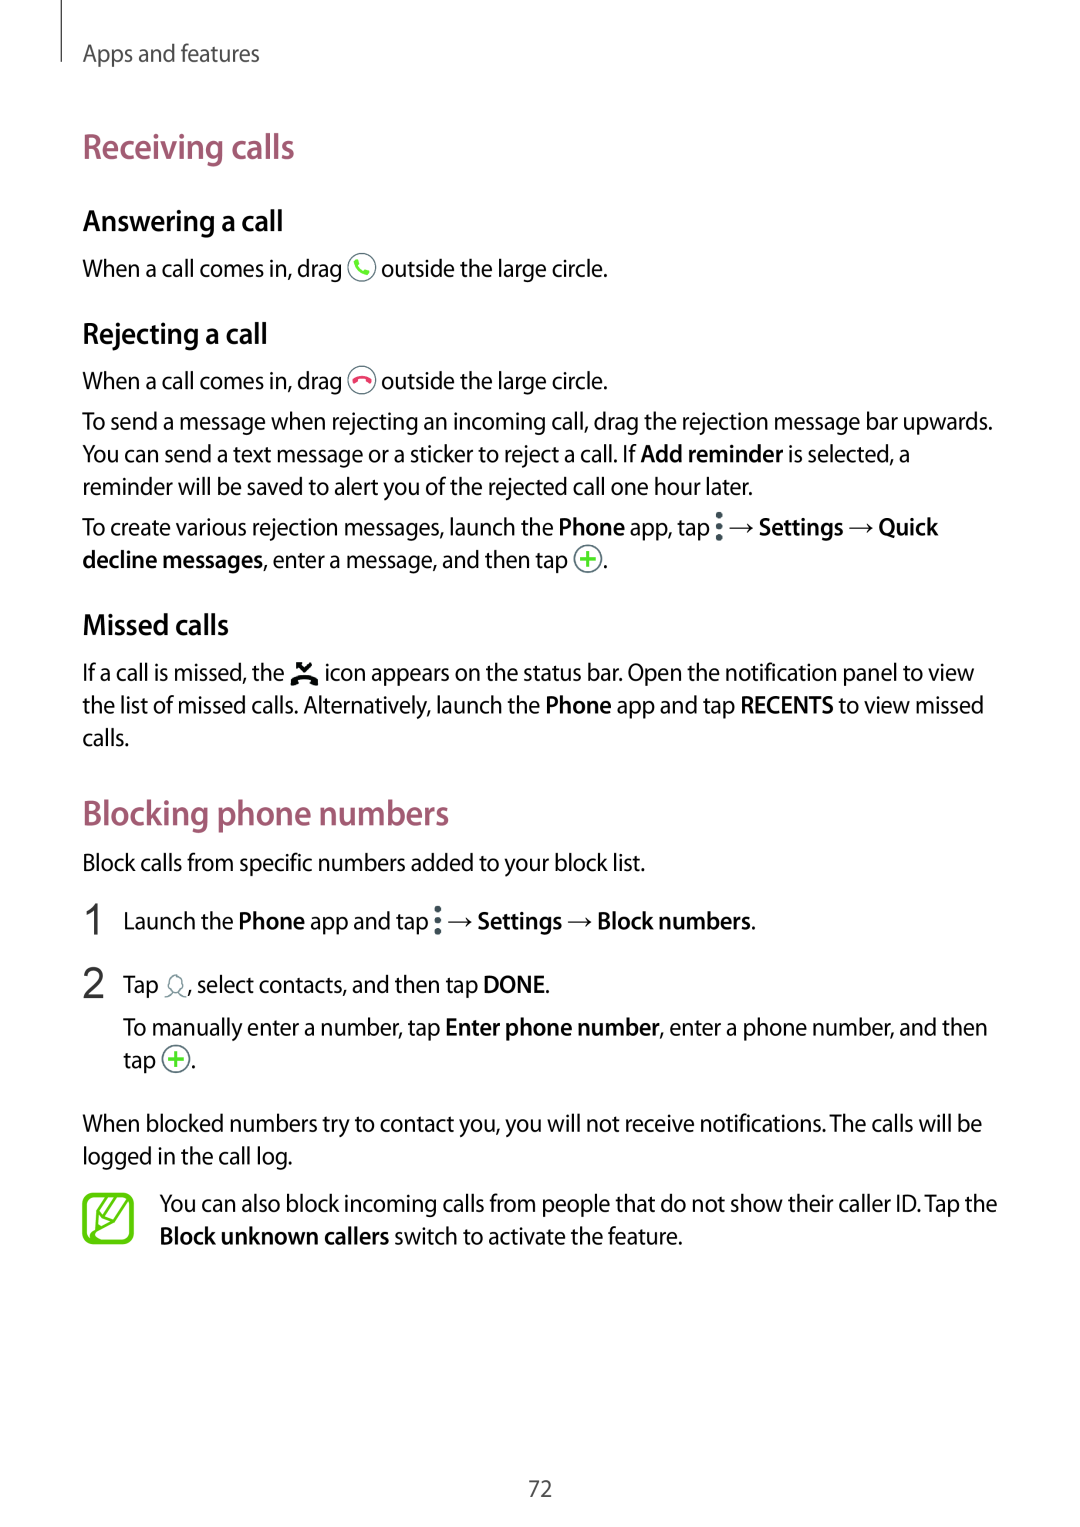 Samsung SM-A530FZKATIM manual Receiving calls, Blocking phone numbers, Answering a call, Rejecting a call, Missed calls 